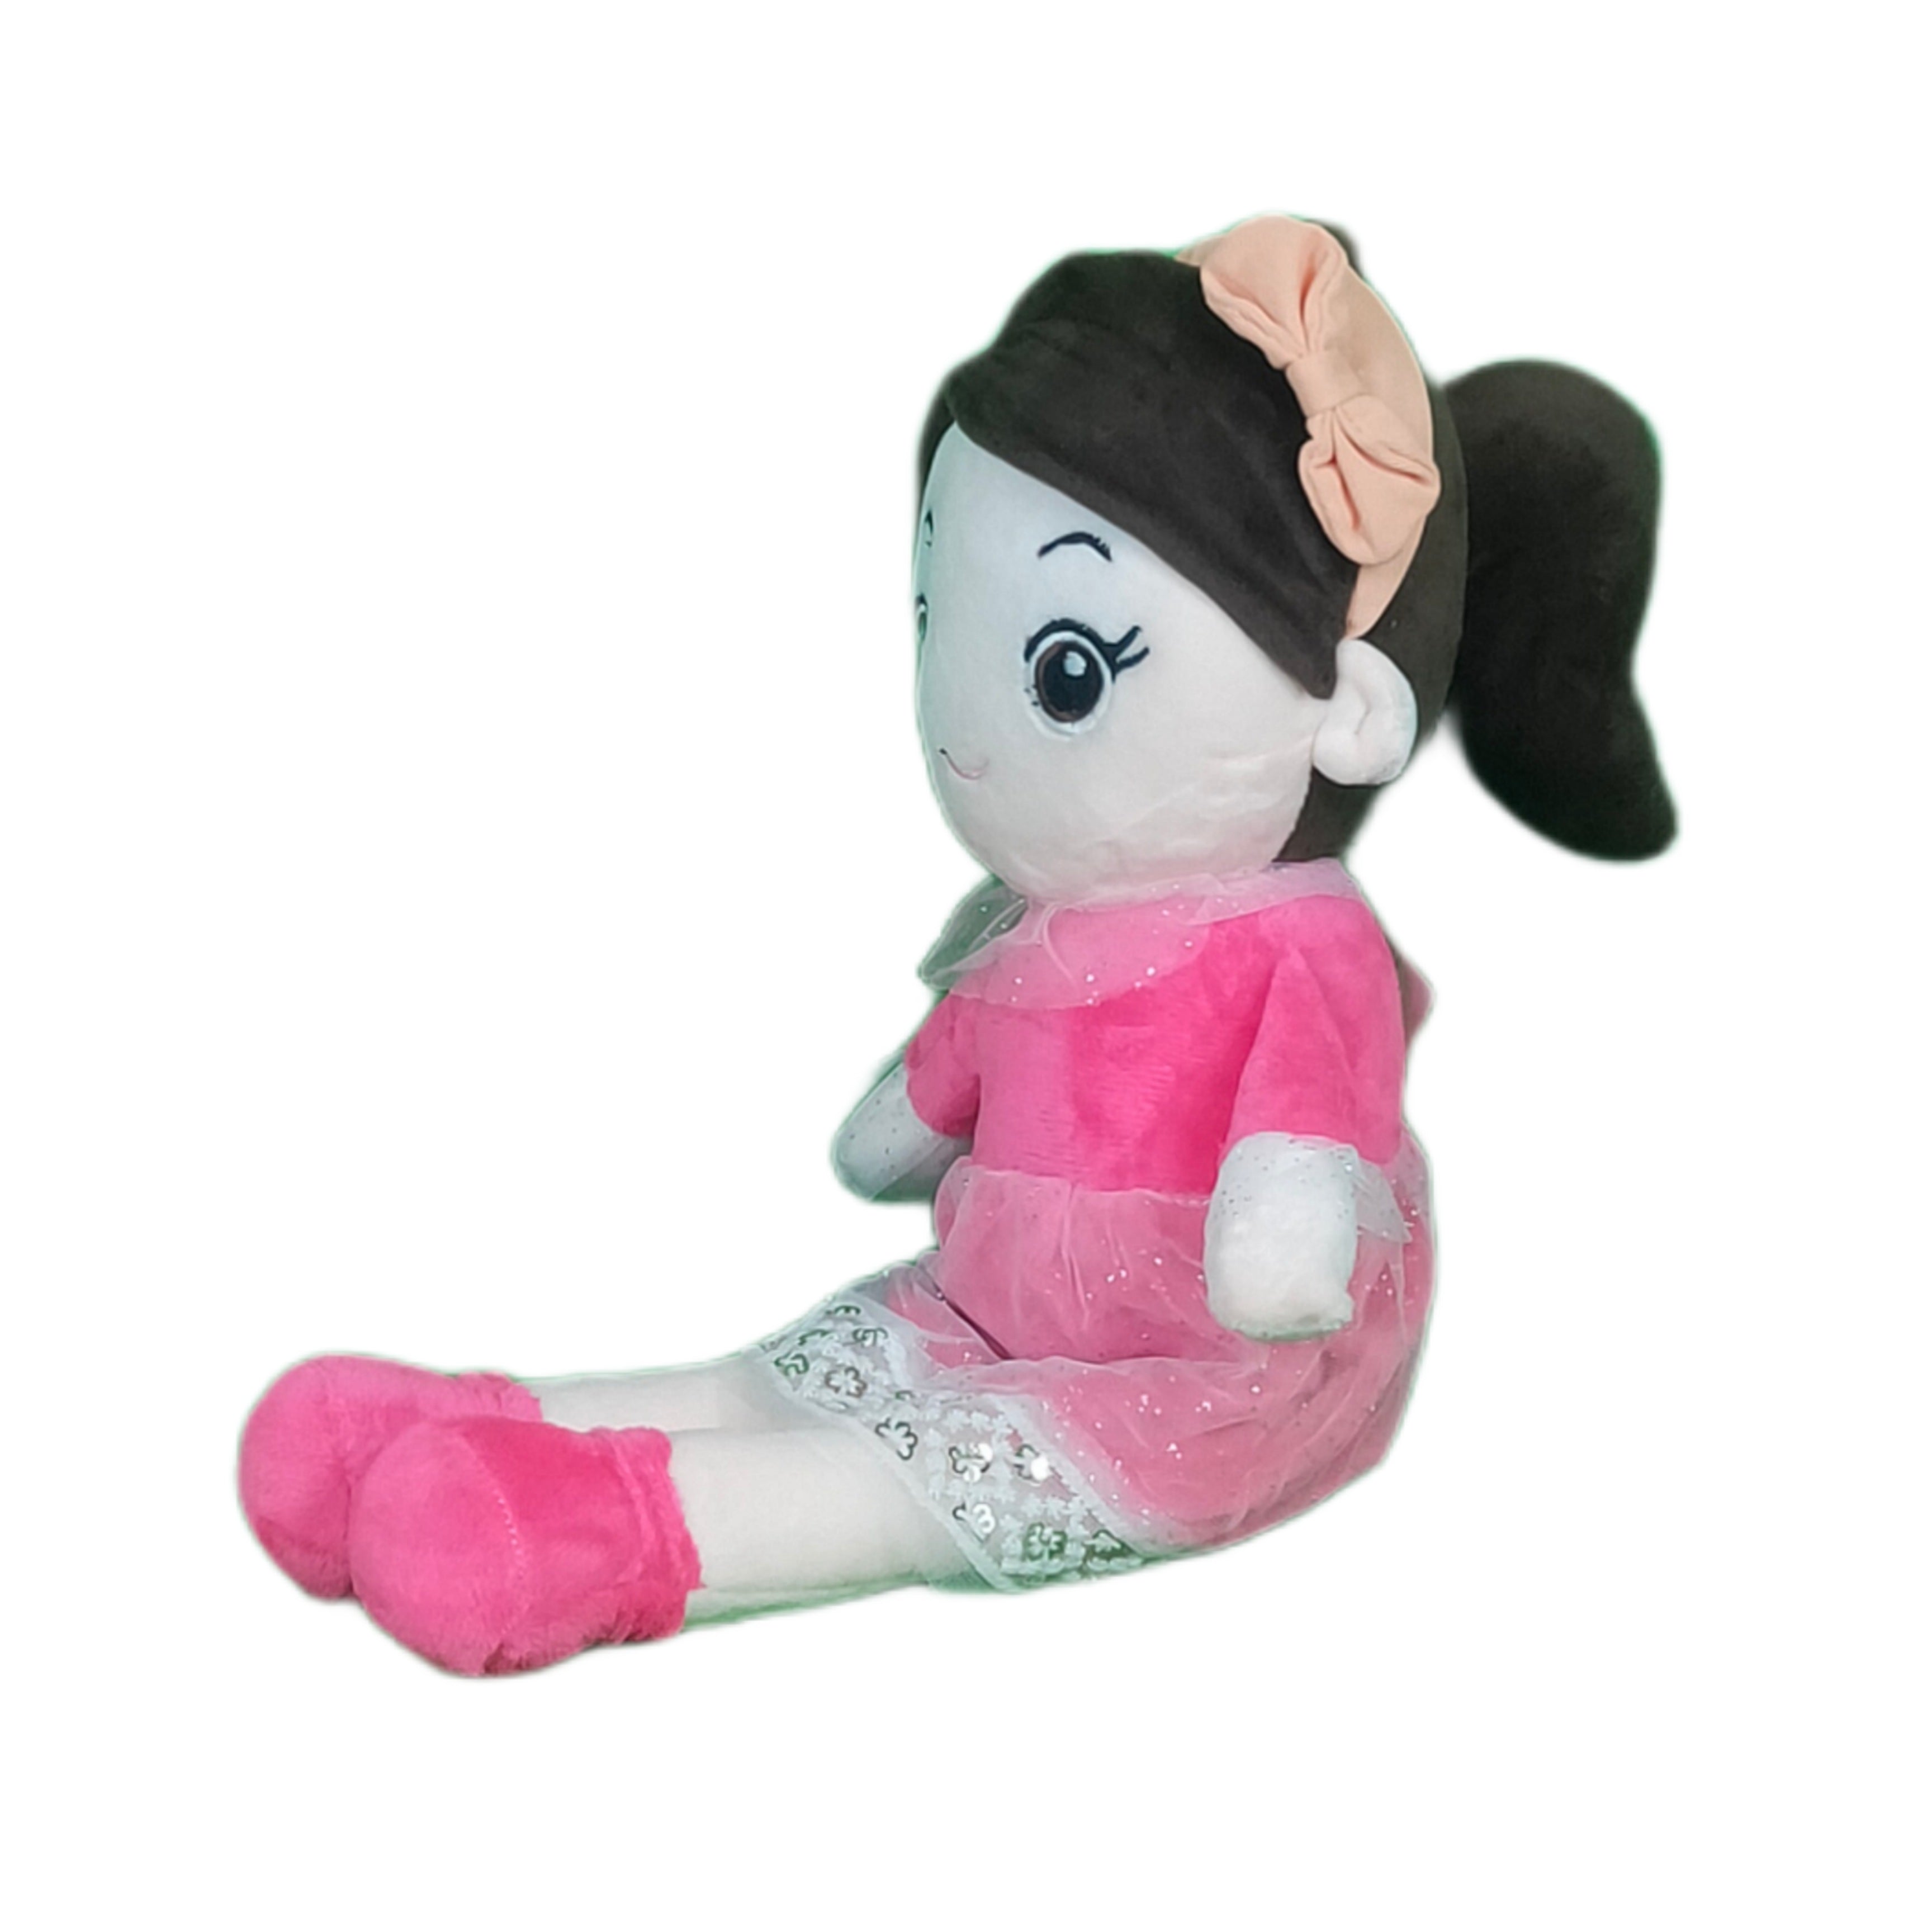 Play Hour Ellie Rag Doll Plush Soft Toy Wearing Pink Dress for Ages 3 Years and Up, 45cm